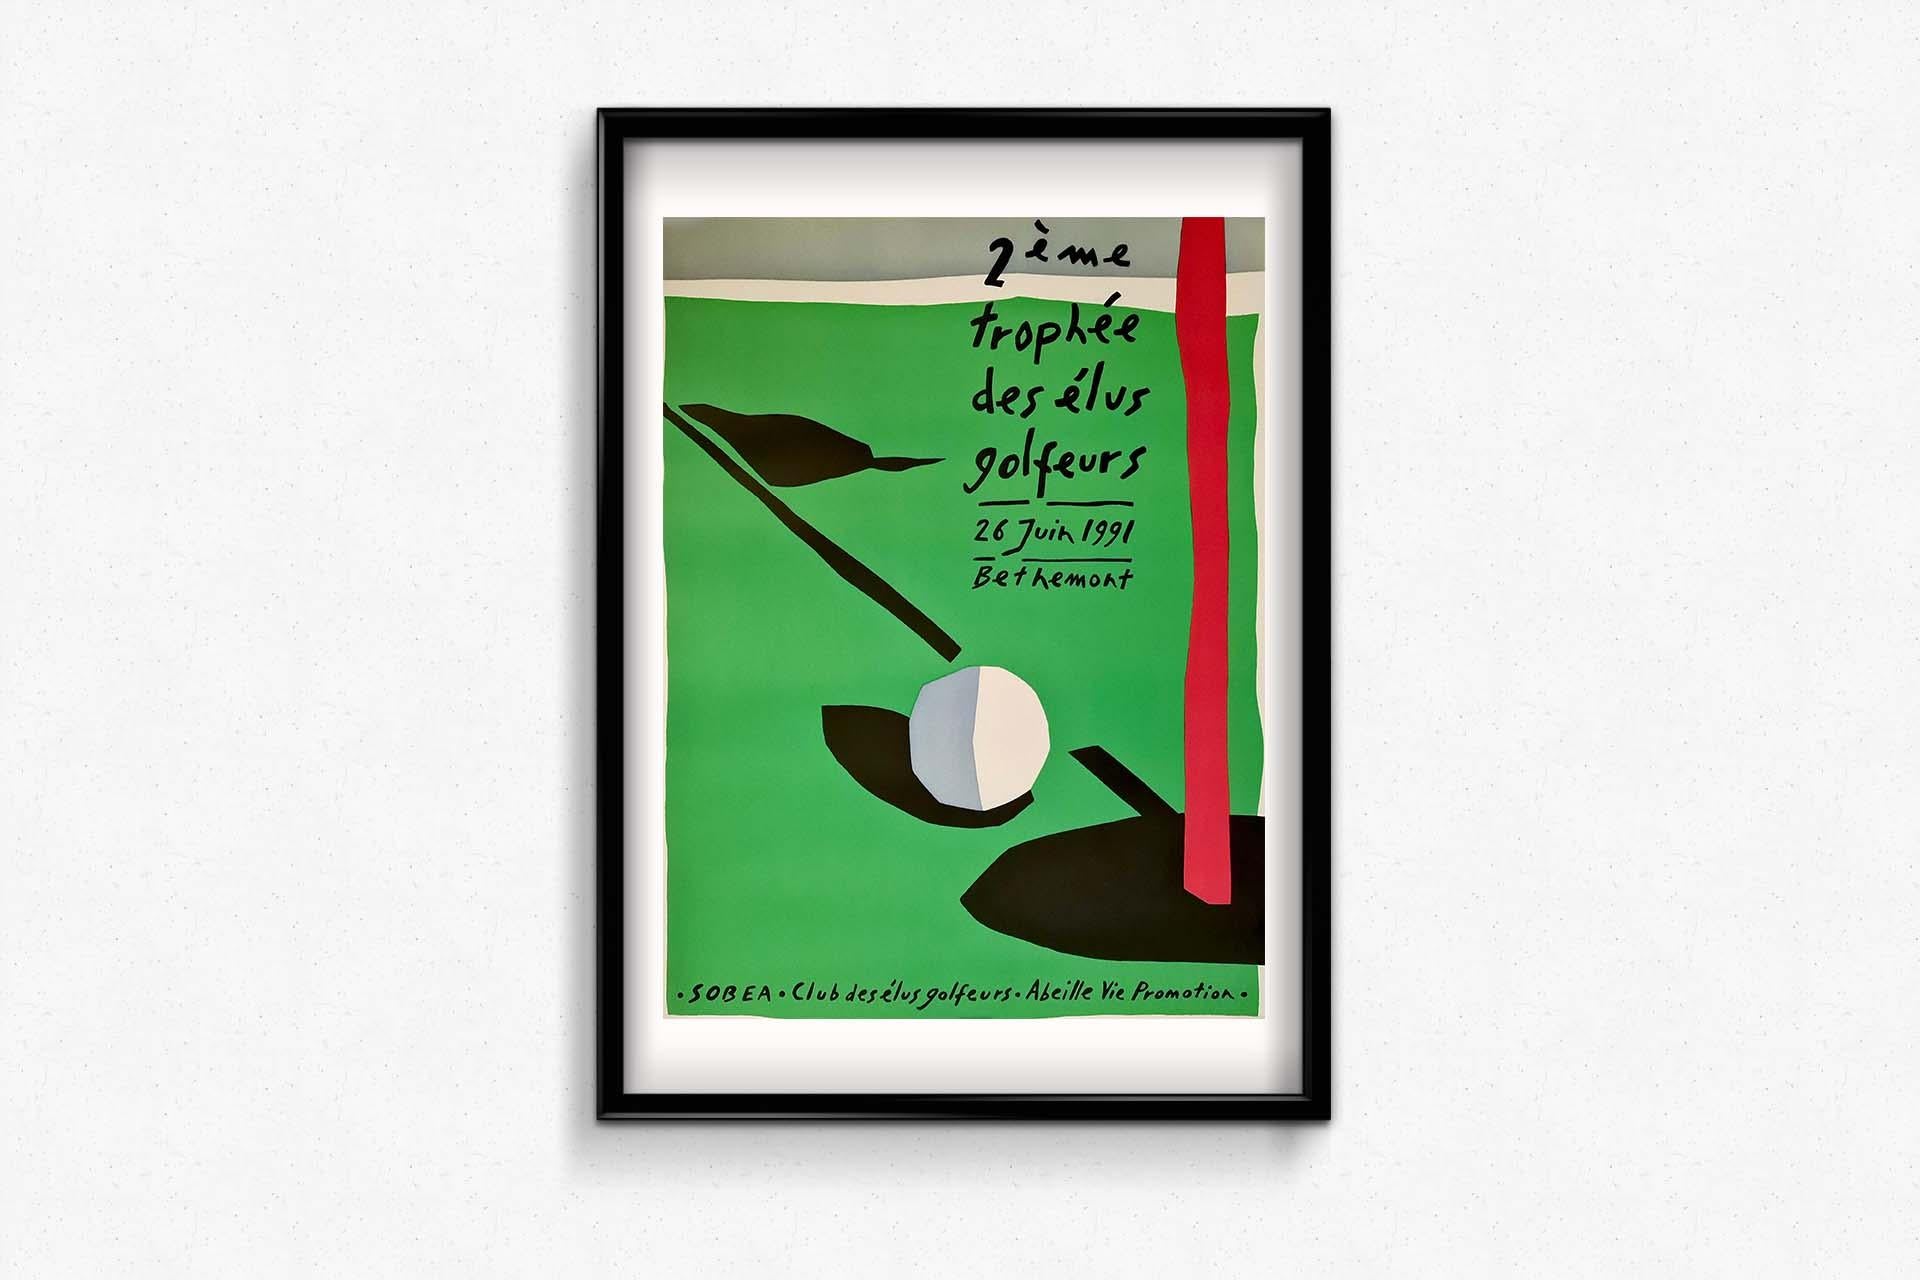 Beautiful poster of 1991 : 2nd trophy of the elected golfers of Bethemont.

The Golf de Bethemont, located only 20 minutes from Paris, is to this day the only work in France of the German champion Bernhard Langer (double winner of the